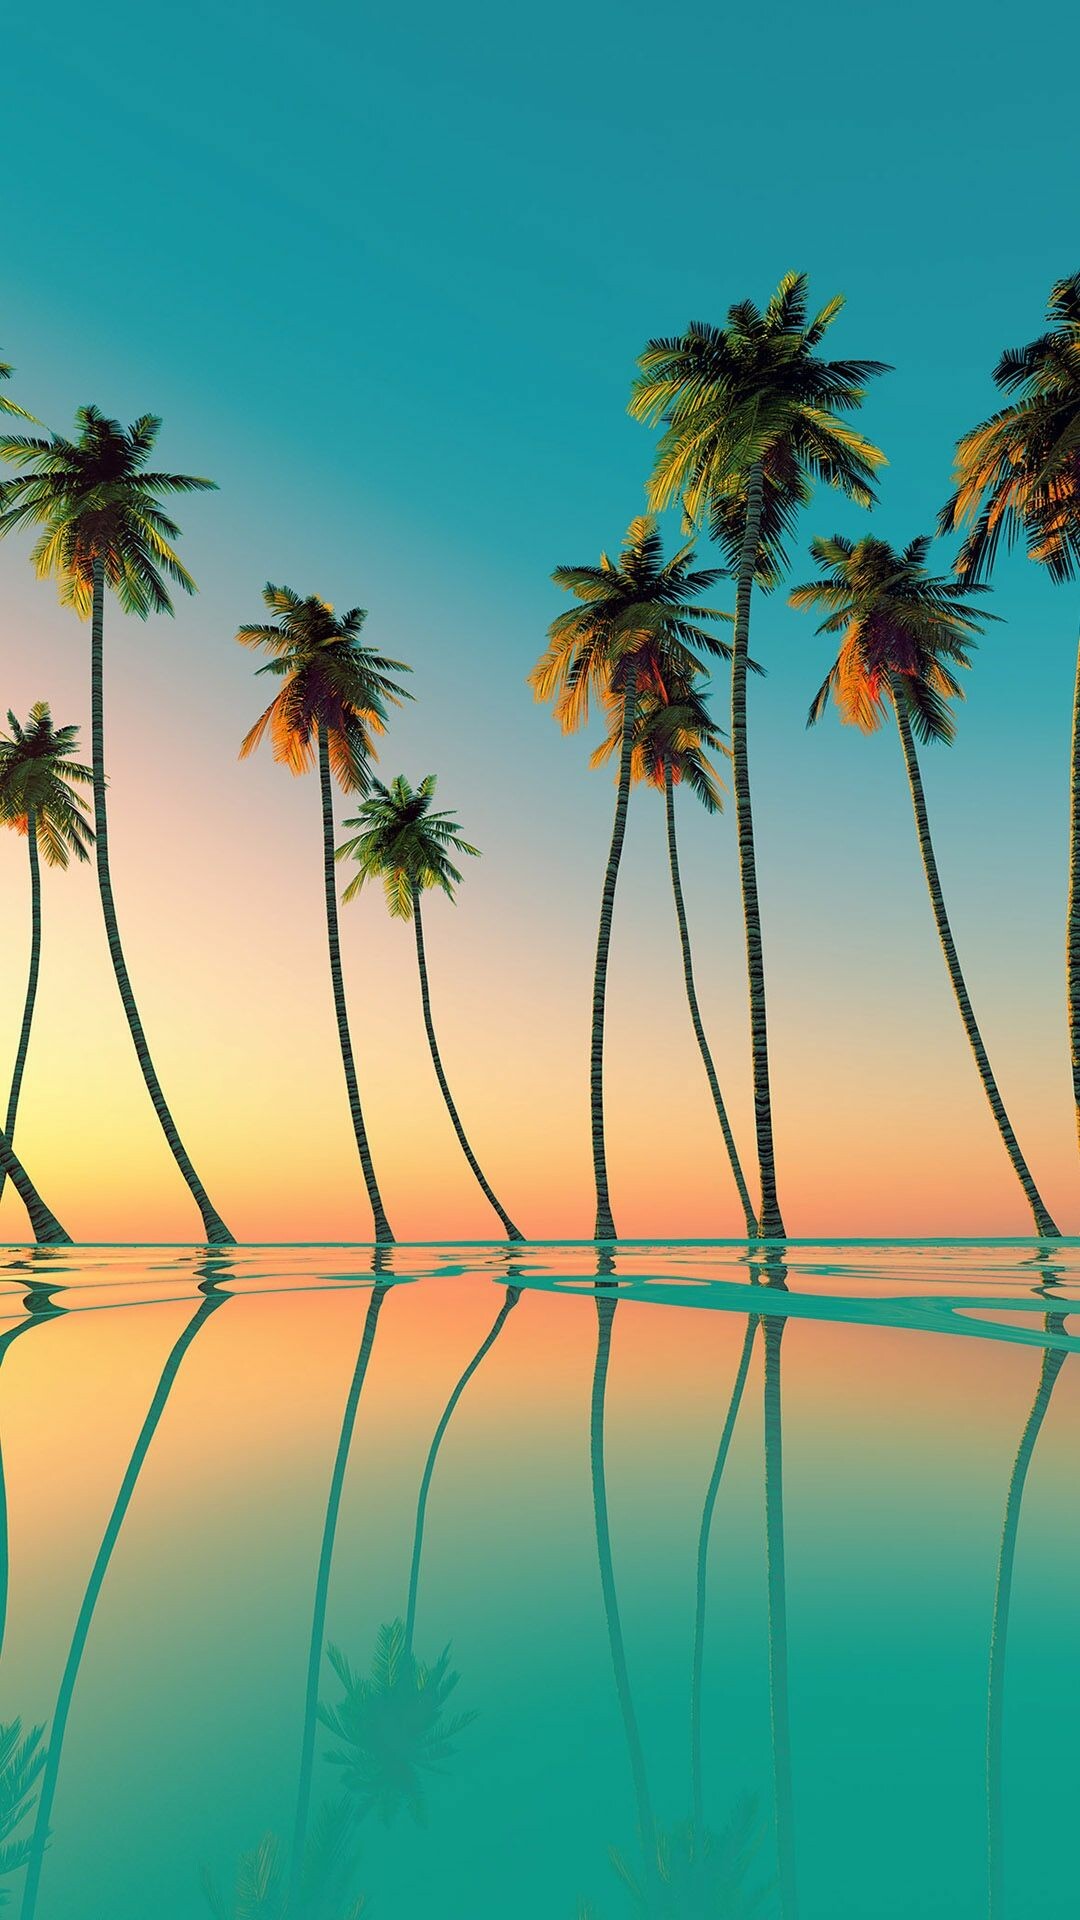 Palm Tree: Known for their long, slender trunks and thin fronds. 1080x1920 Full HD Wallpaper.